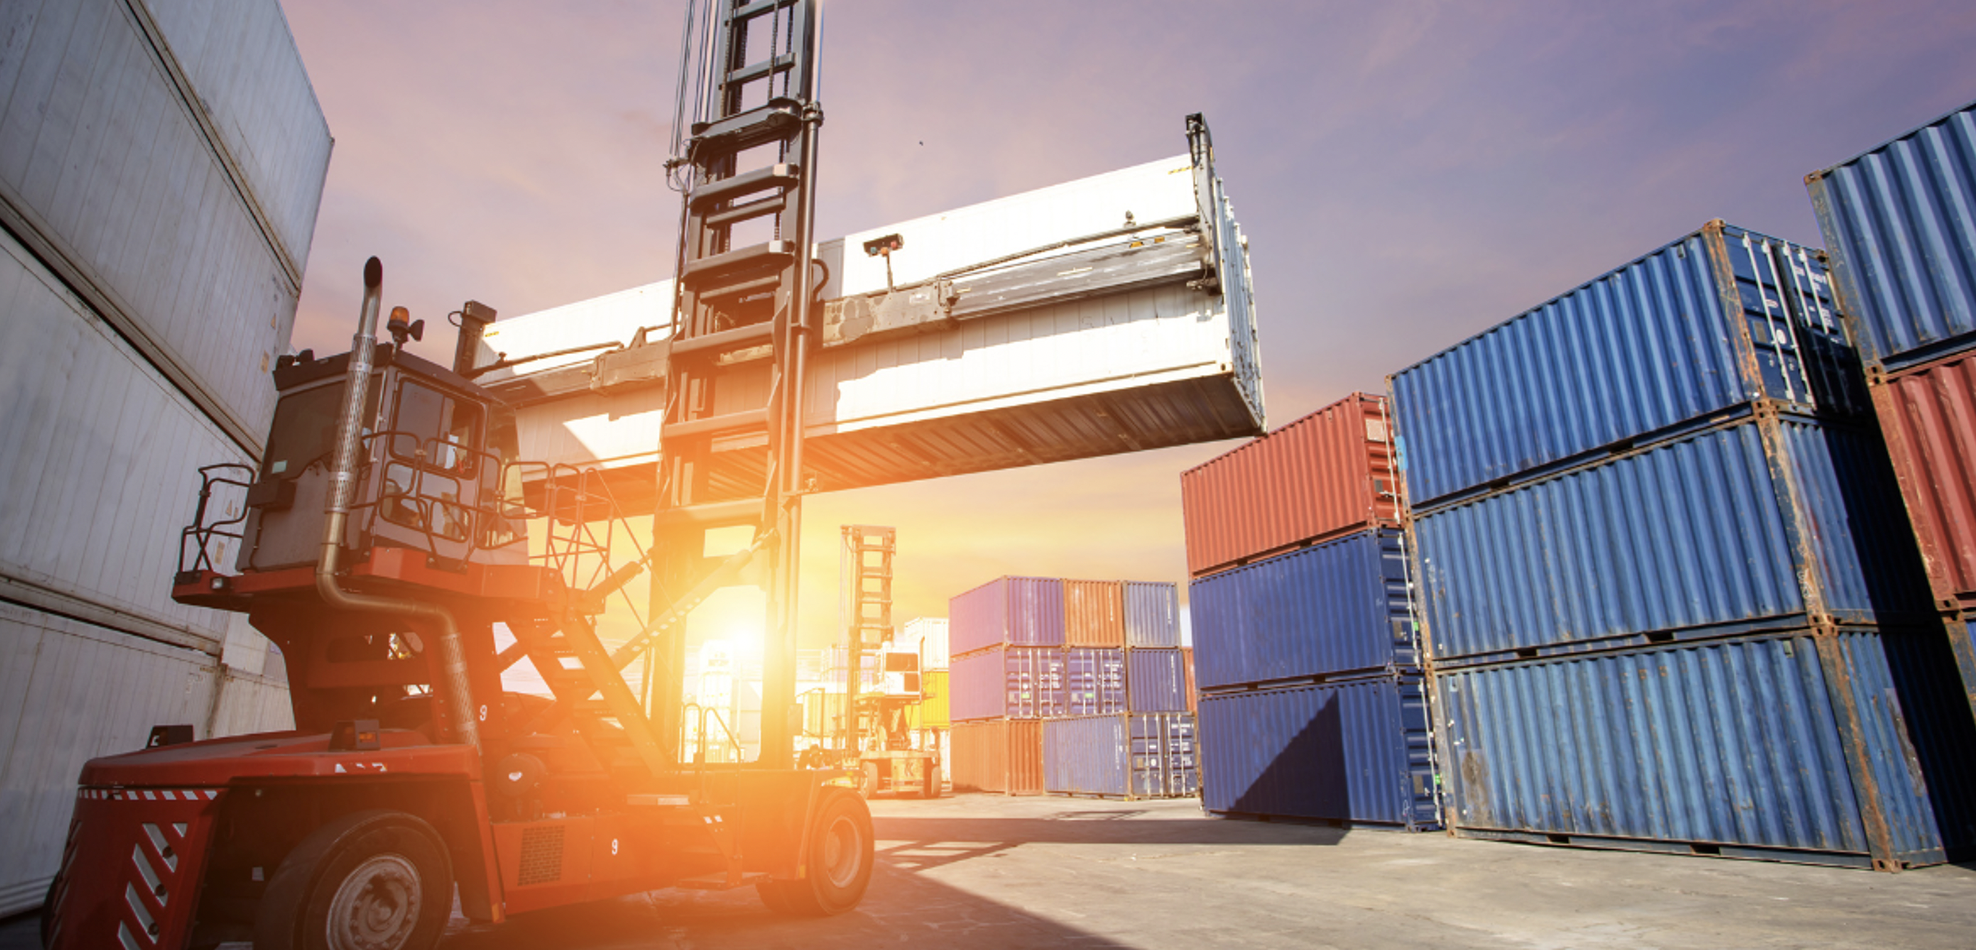 What are the key roles of a logistics company?